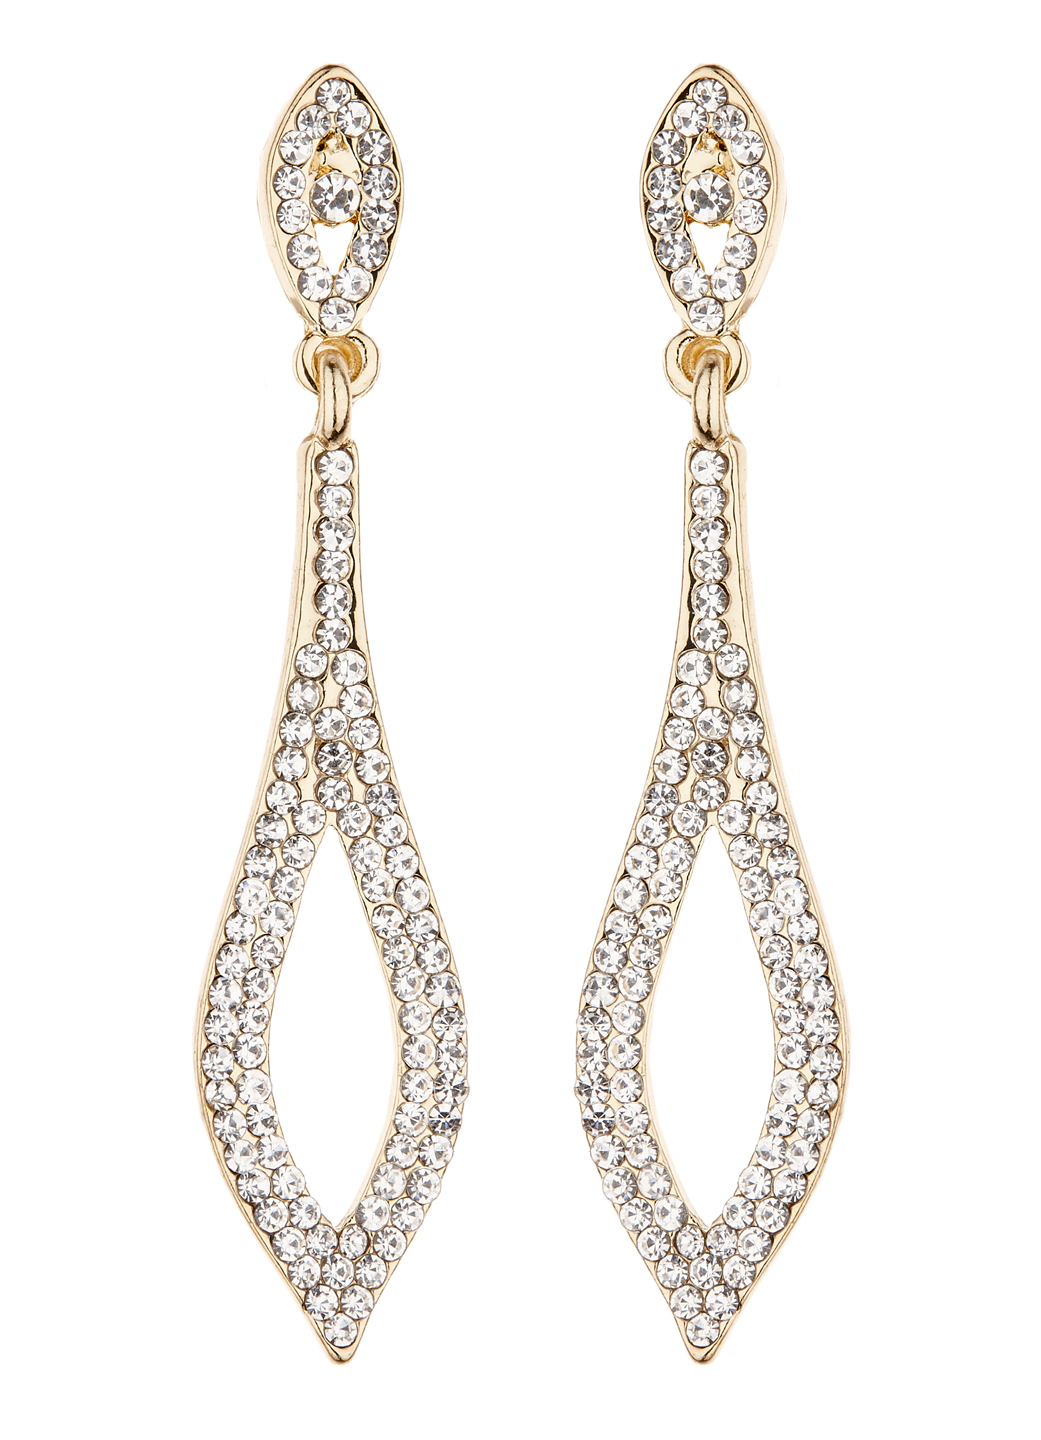 Clip On Earrings - Banba G - gold drop earring with clear crystals